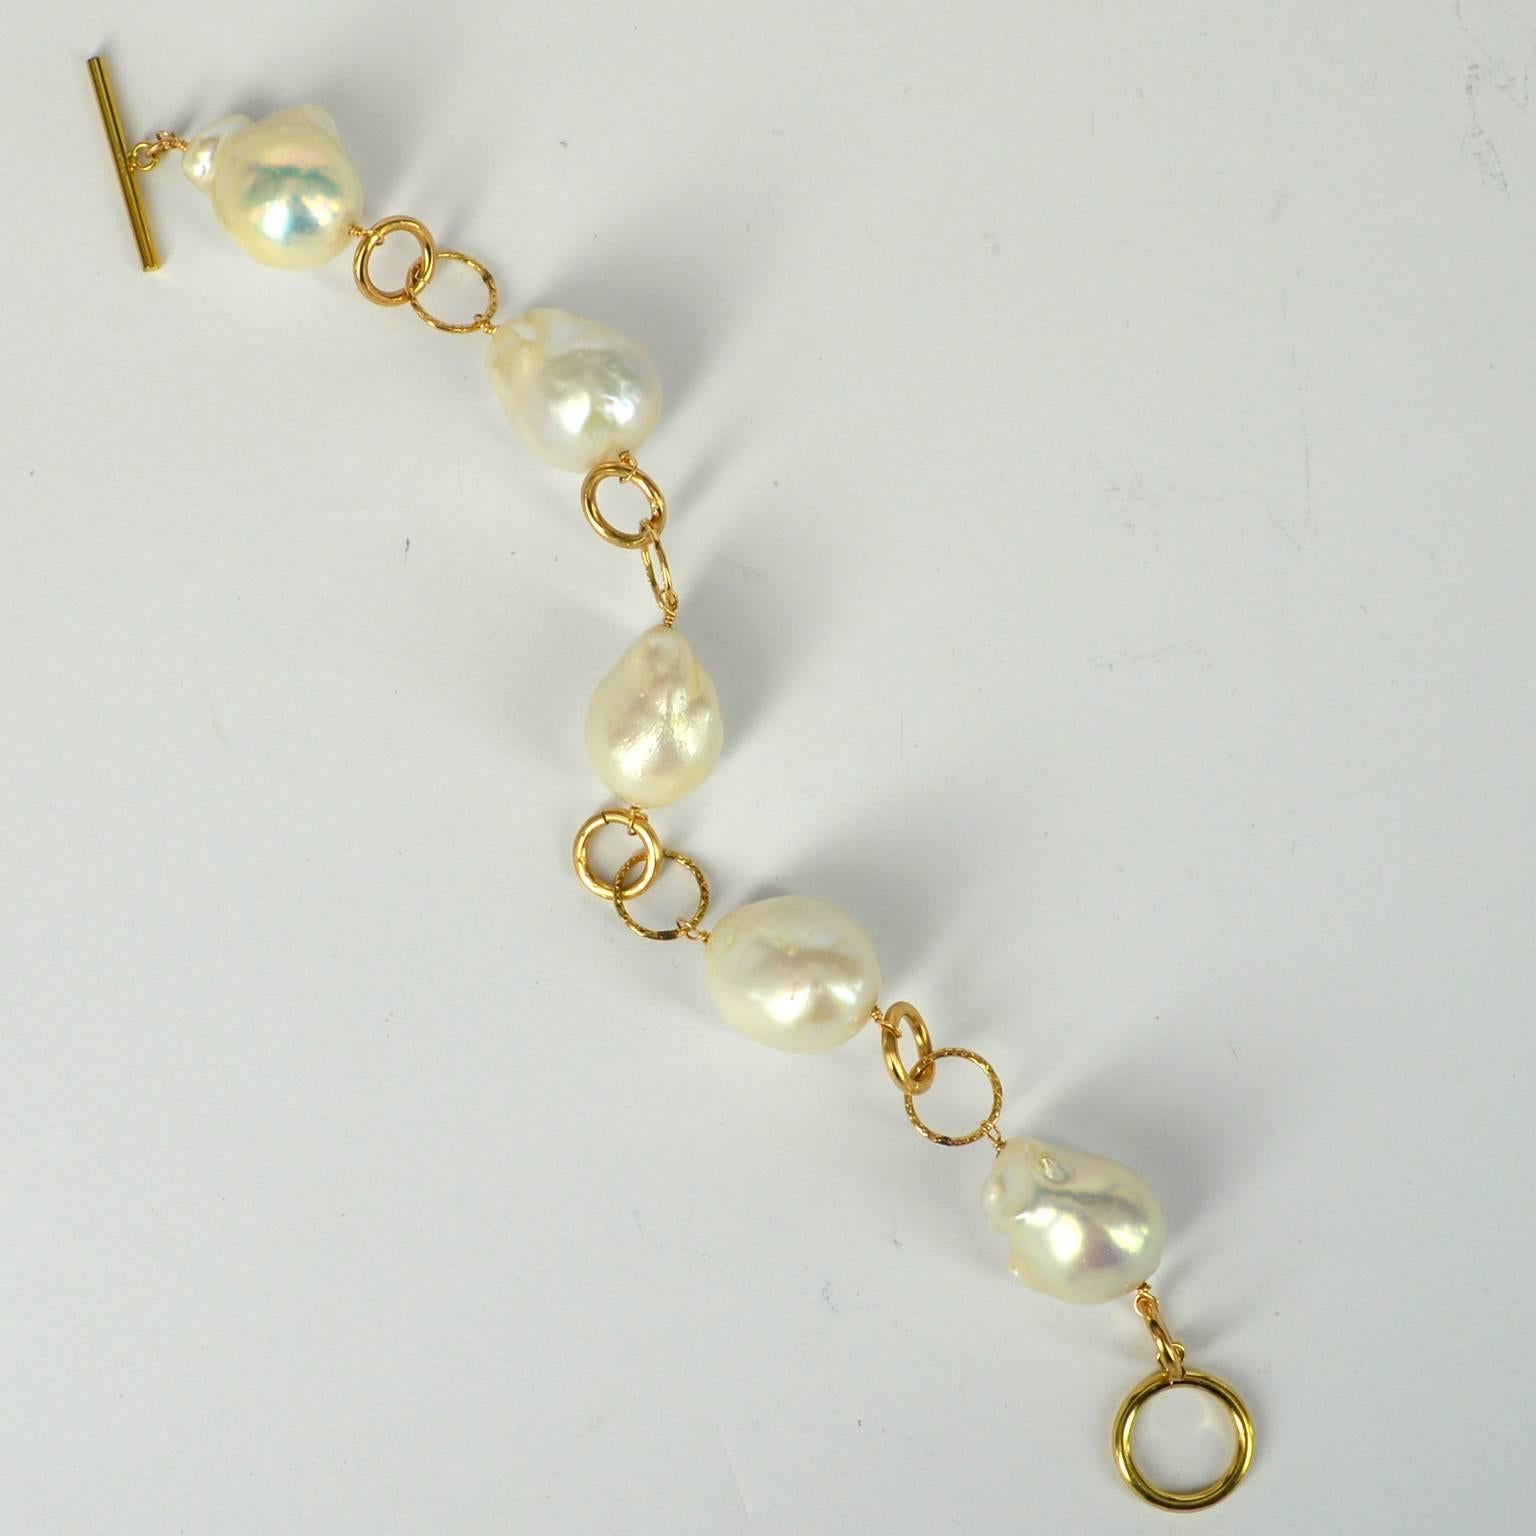 5 beautiful Baroque Fresh Water Pearls approximately 19x16mm each linked with smooth and textured 14k Gold filled 10mm rings and finished with a easy to use Toggle clasp. The ring on the Toggle clasp is 15mm and the finished bracelet measures 22cm